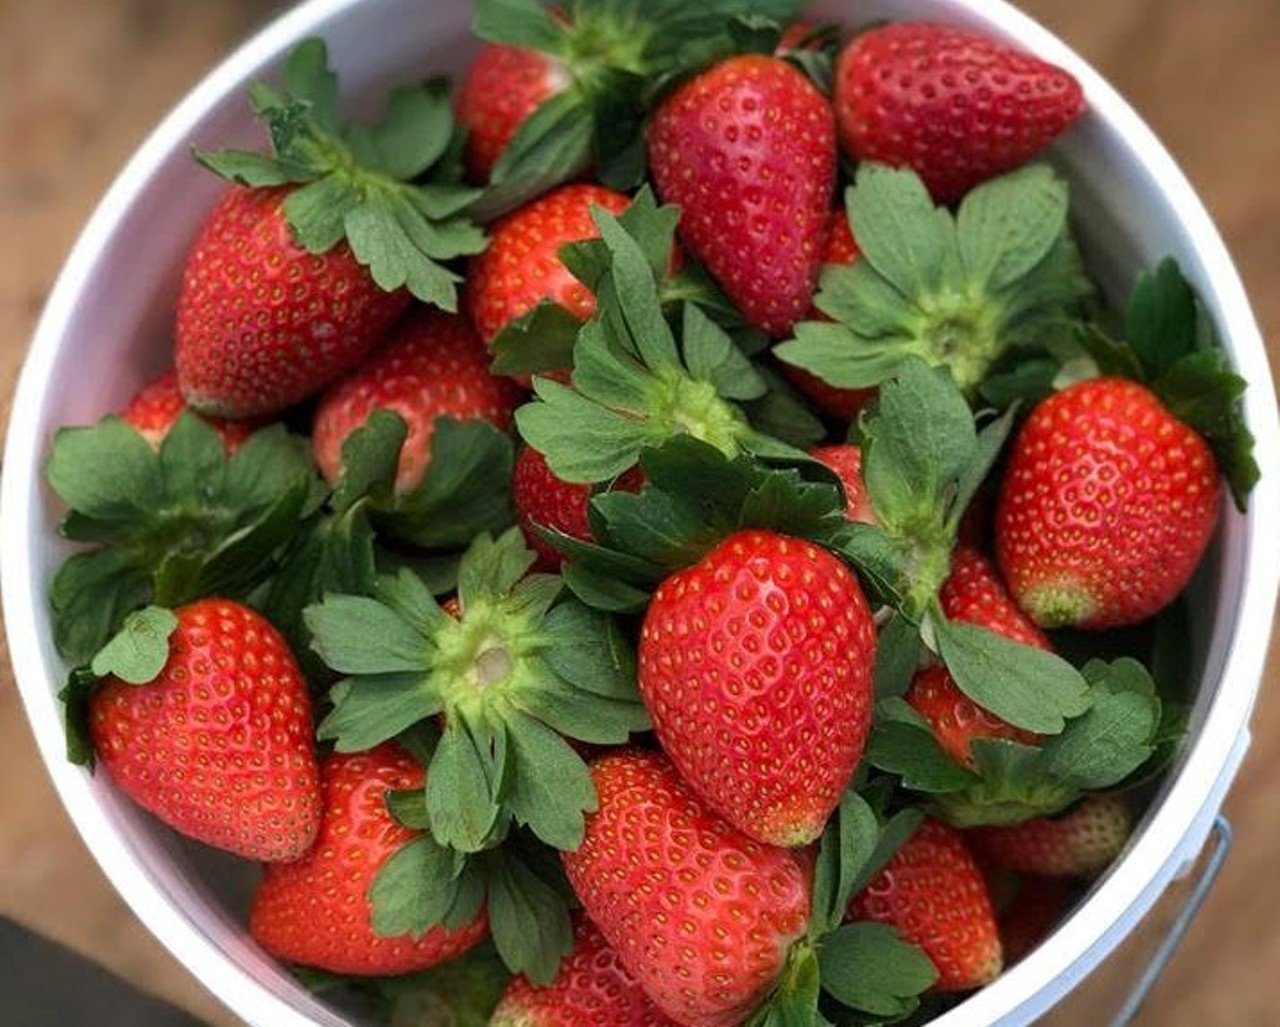 
Mick Farms
4261 Canoe Creek Rd., St. Cloud, 321-231-5540
South of Orlando, Mick Farms opens every Monday, Wednesday and Saturday at 10 a.m. for strawberry picking. Buckets are $3/lb and they also have a vegetable stand on-site with fresh, farm grown produce.
Photo via Mick Farms/Facebook